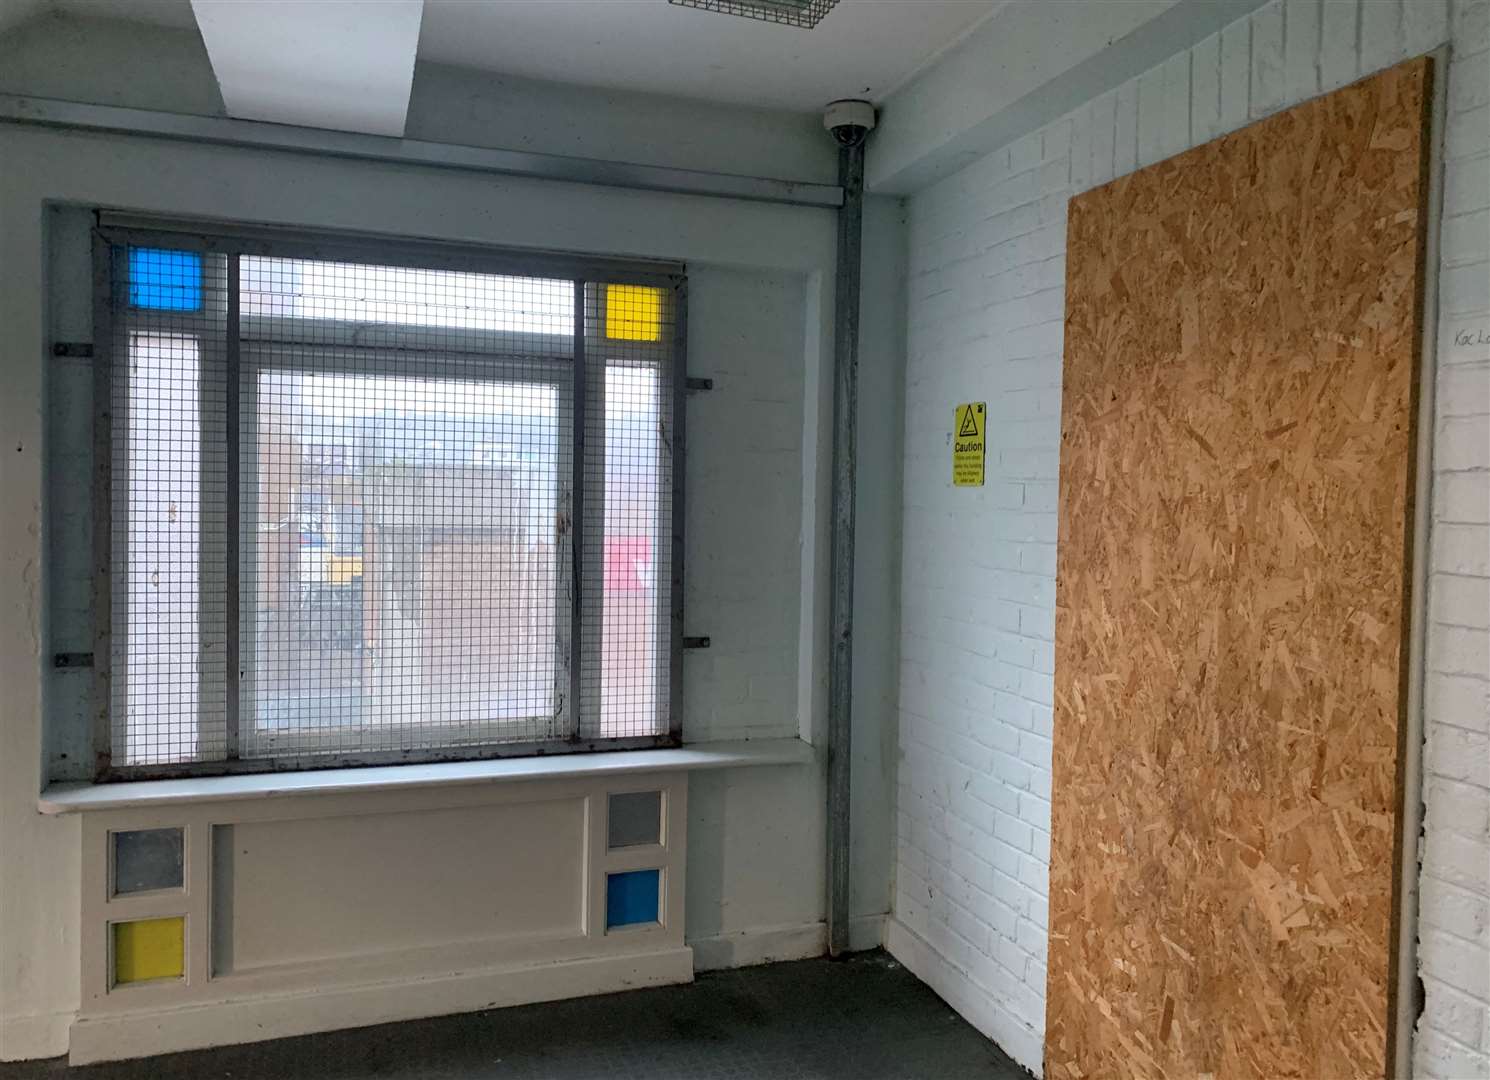 The lifts at Royal Harbour are currently broken and boarded up.